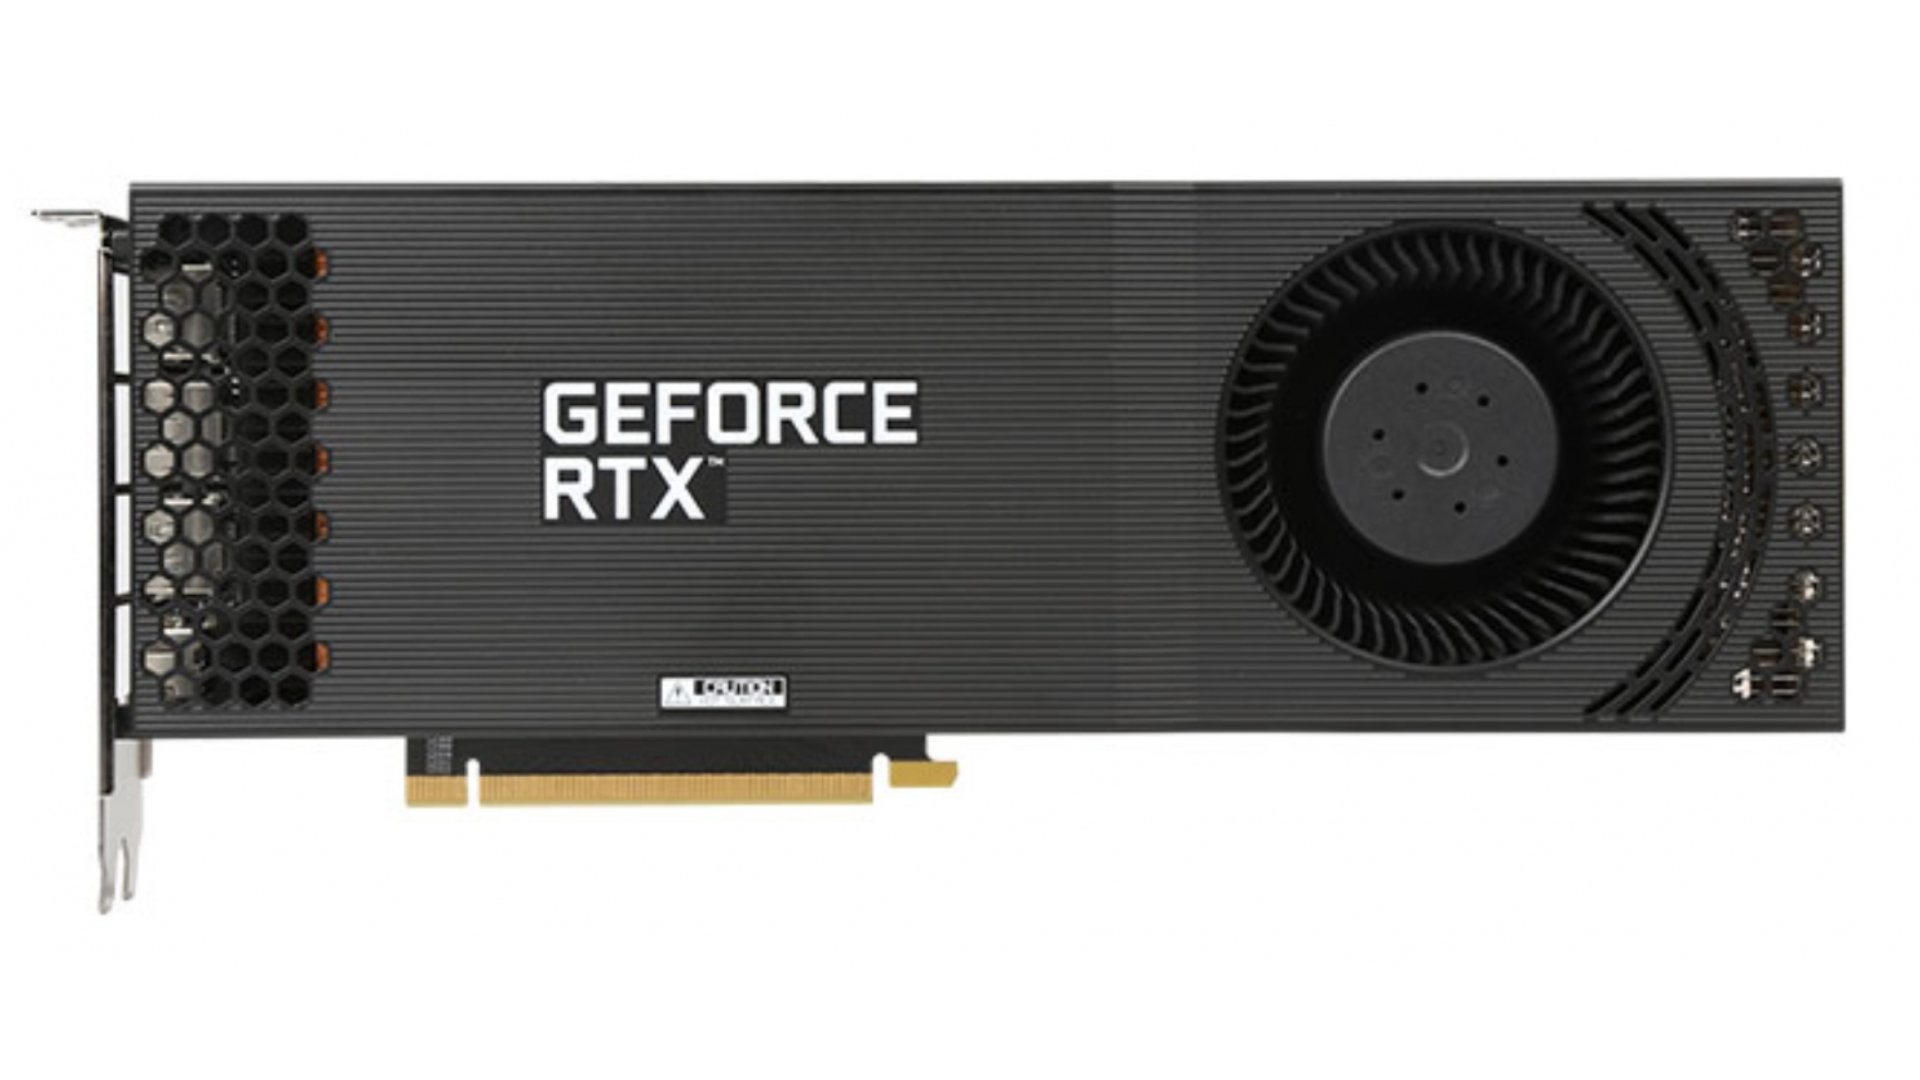 Galax brings back blower-style Nvidia RTX 3080 and 3090 GPUs